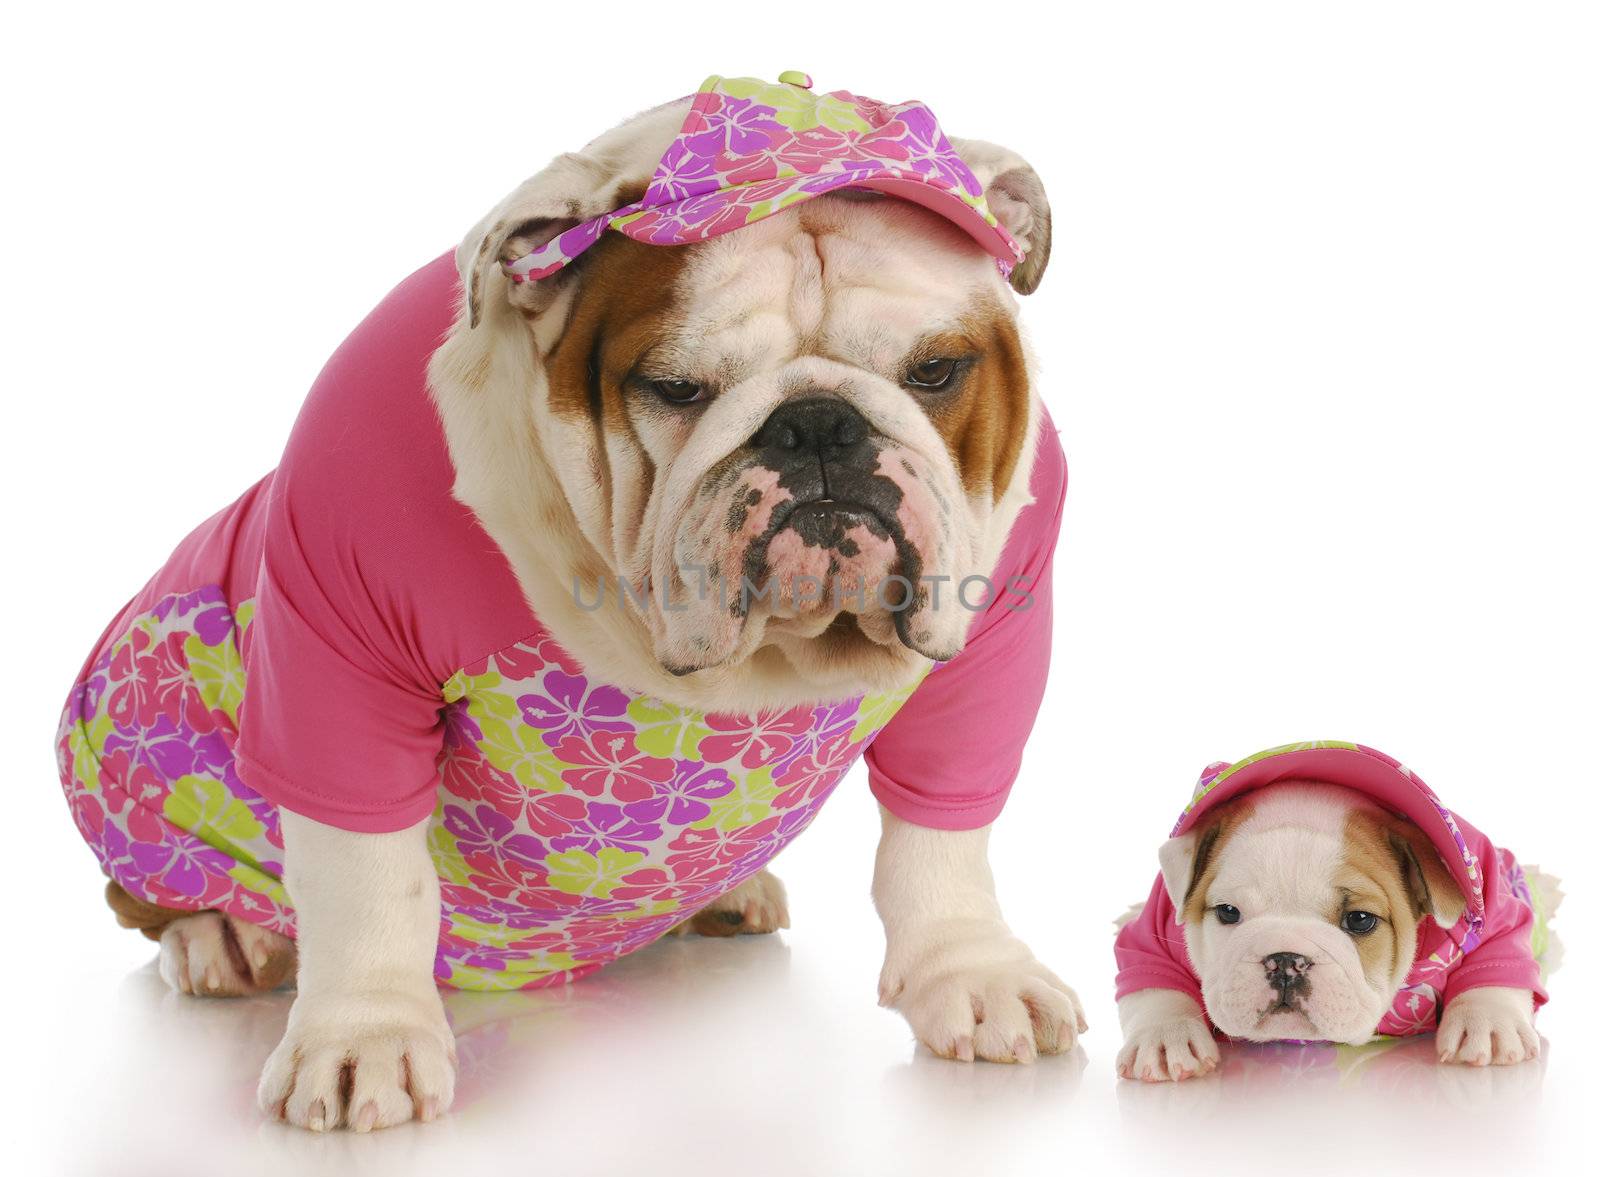 english bulldog mother and puppy wearing matching pink outfits on white background